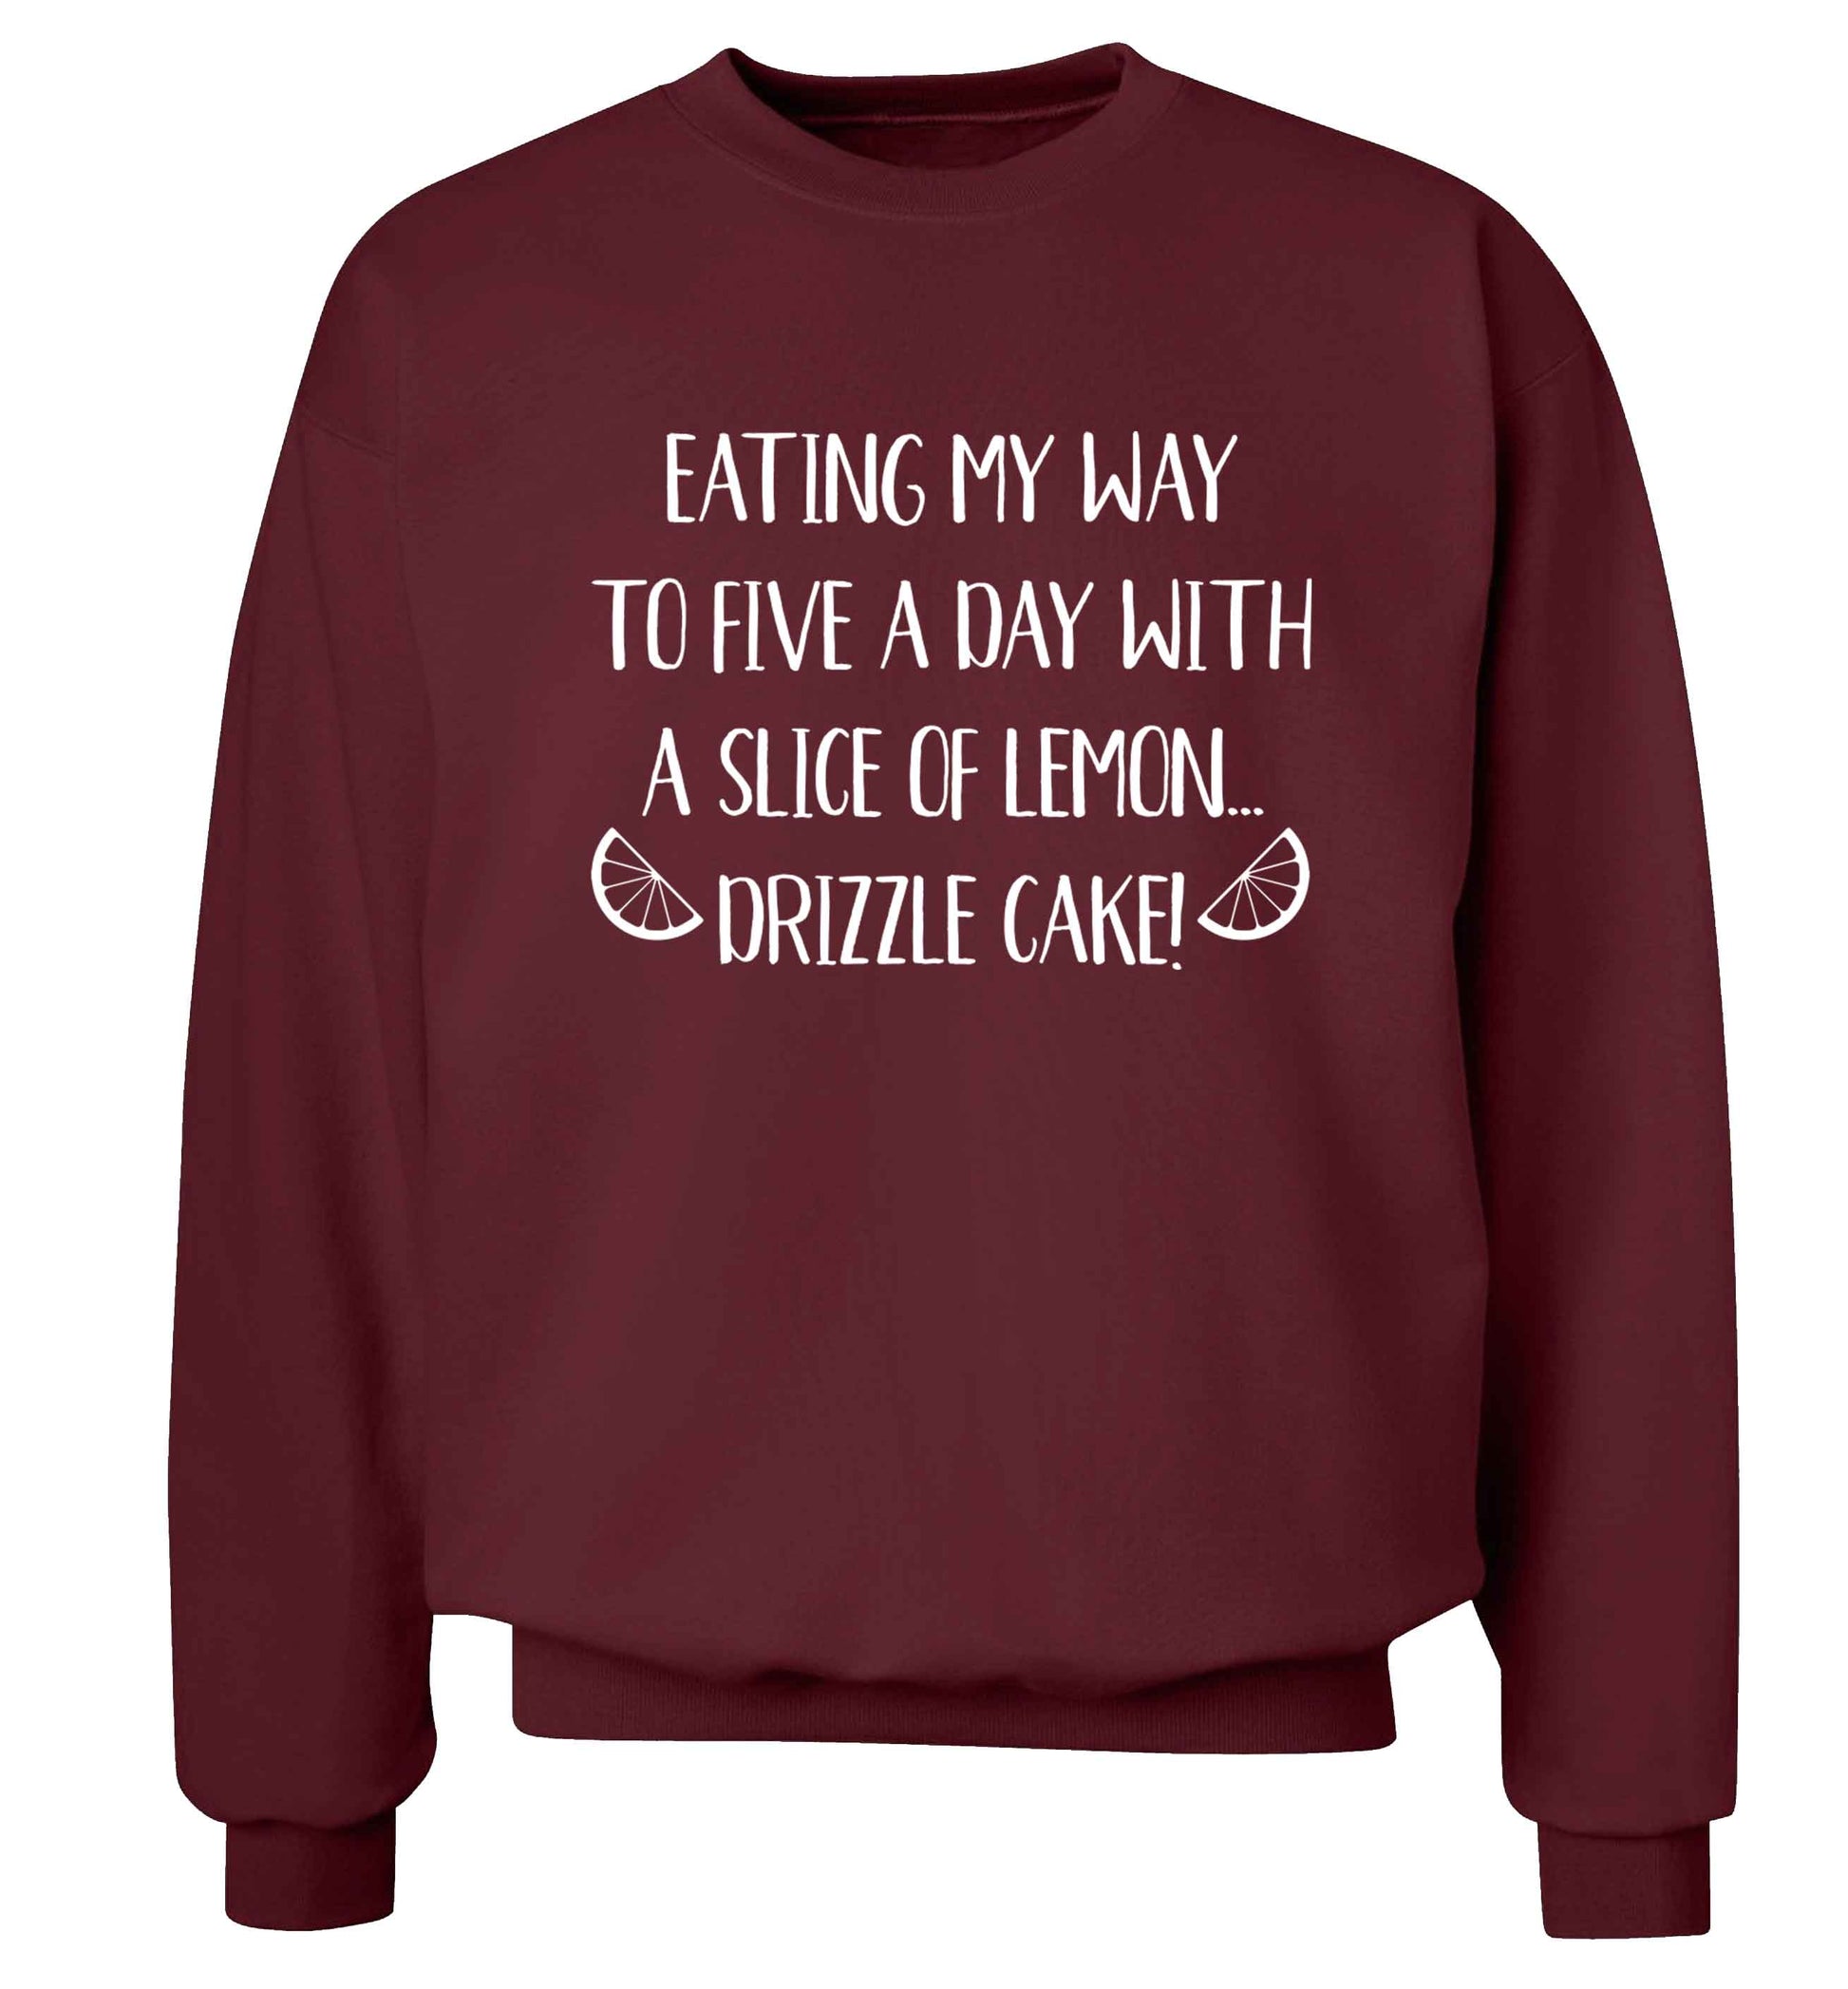 Eating my way to five a day with a slice of lemon drizzle cake day Adult's unisex maroon Sweater 2XL